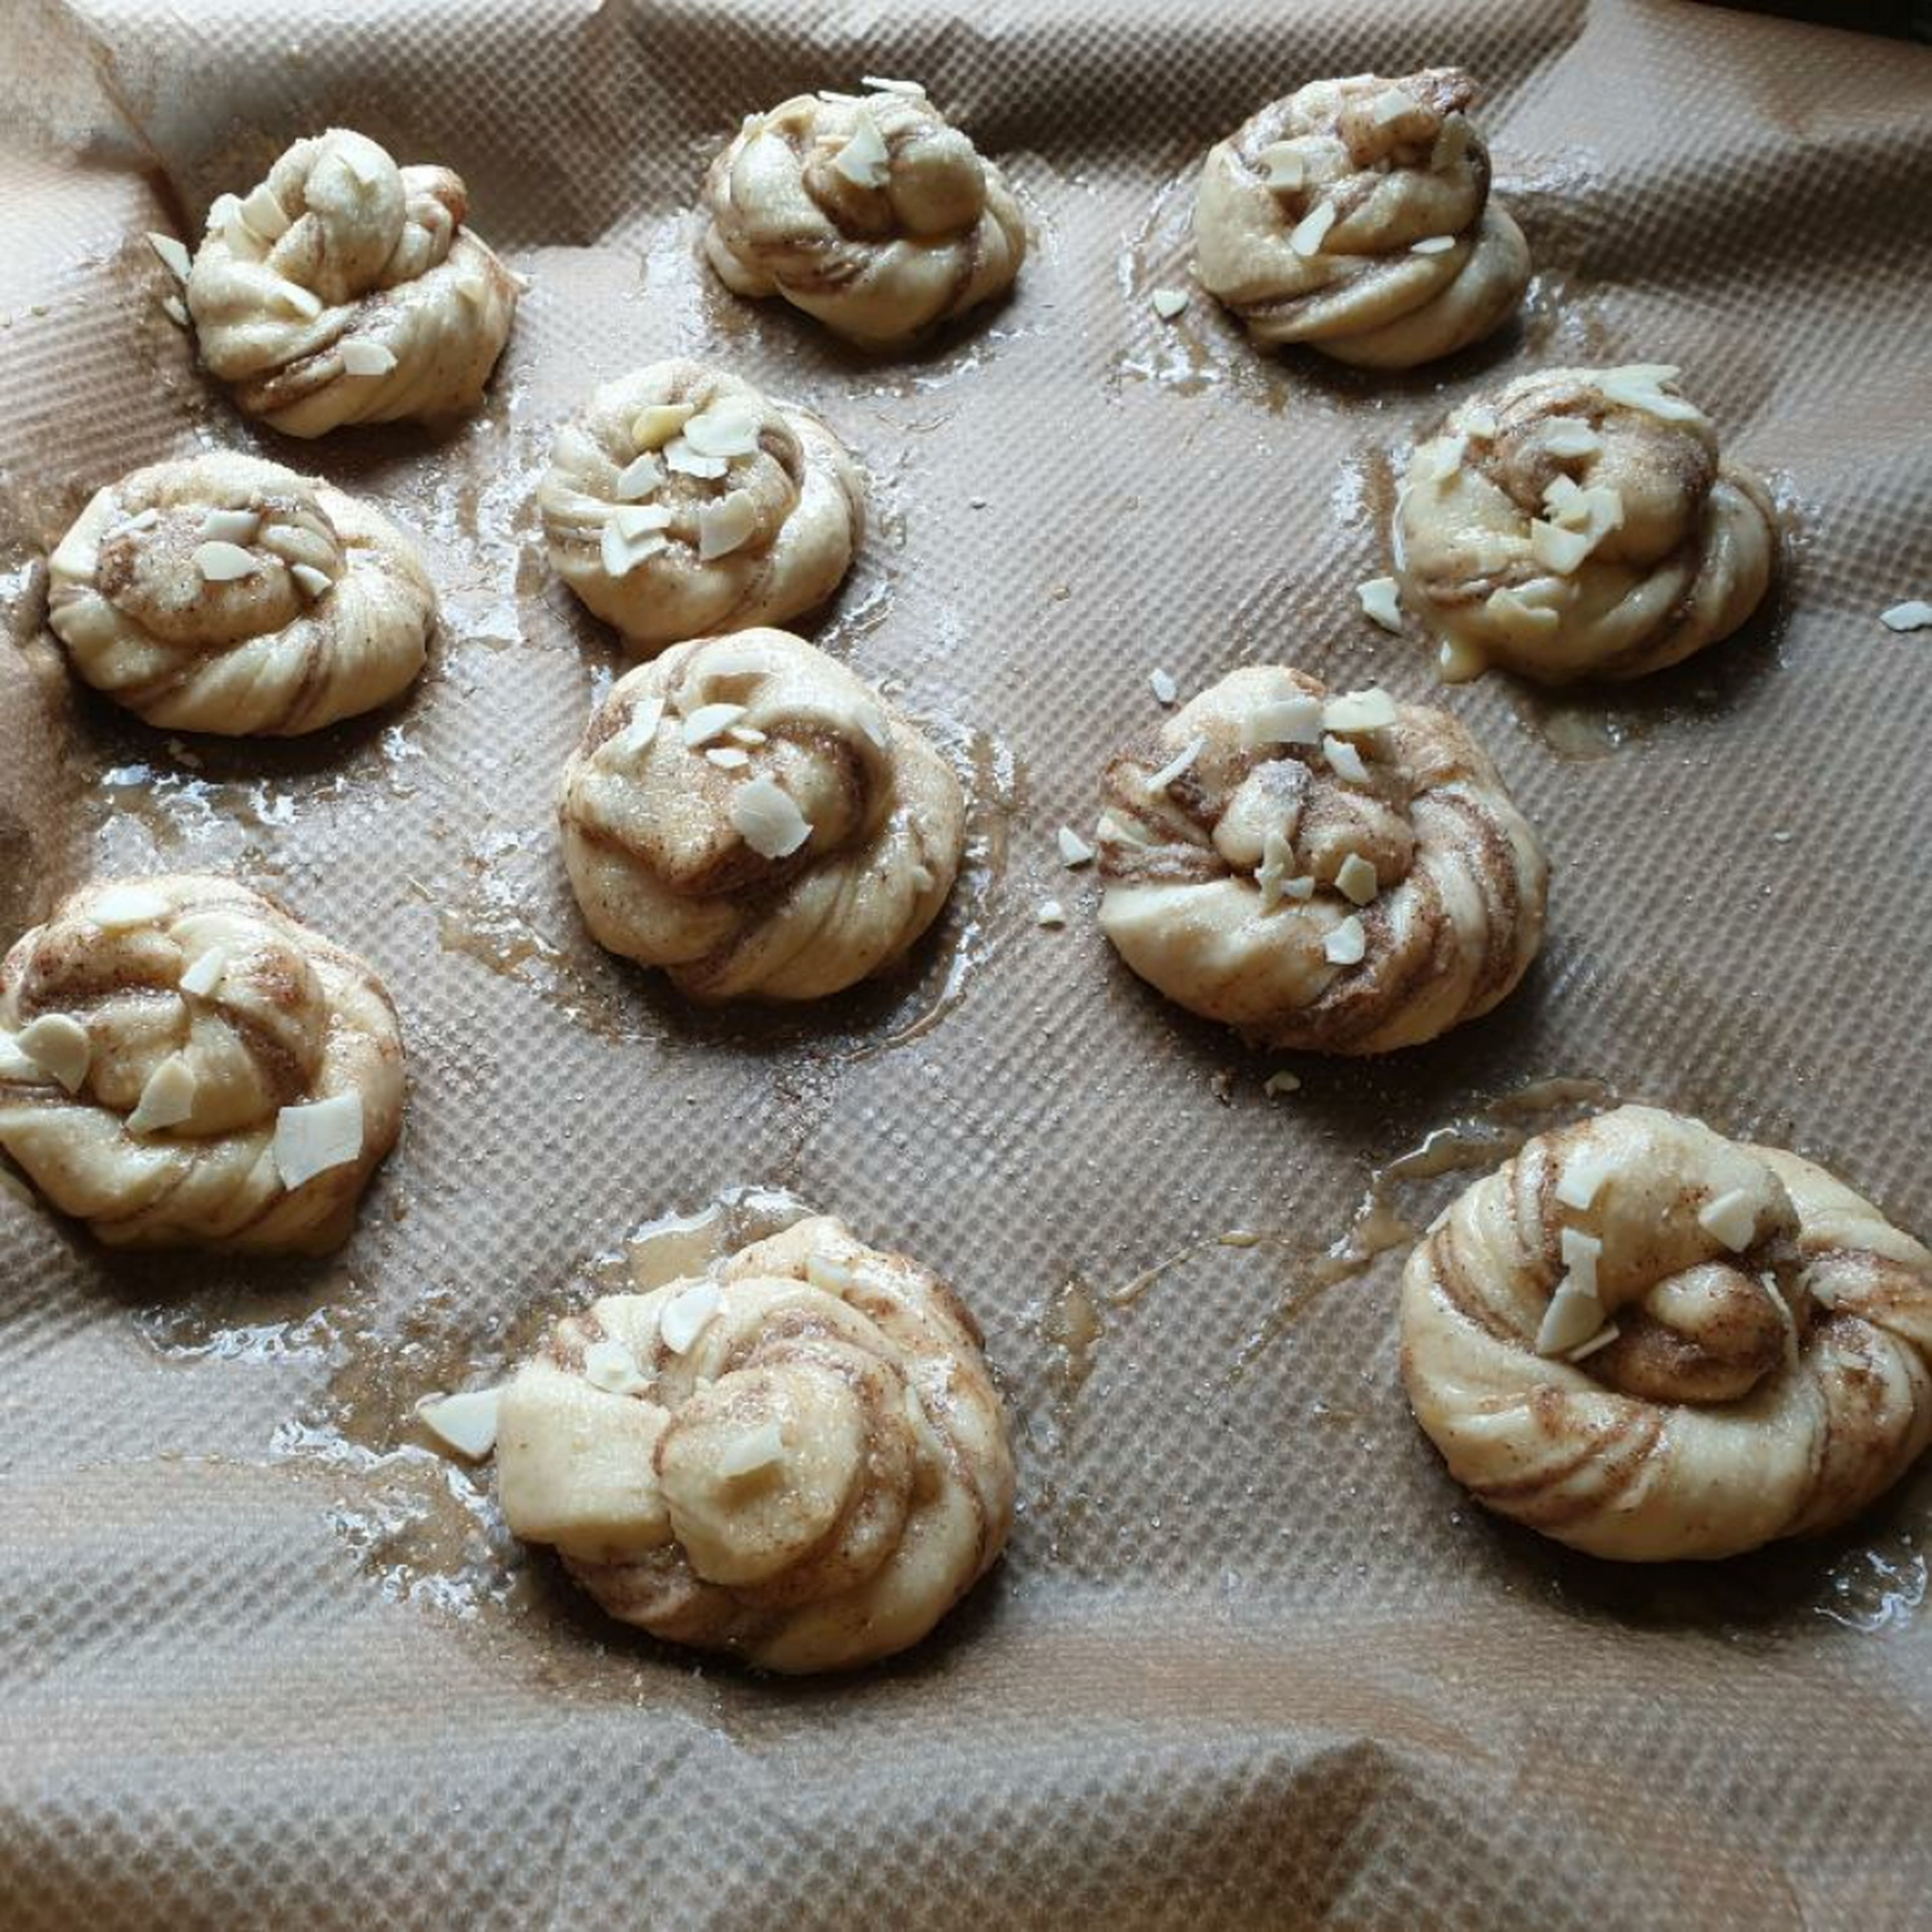 Arrange the shaped dough in a baking tray lined with parchment paper. Brush the buns with egg wash and sprinkle either chopped almonds or pearl sugar.